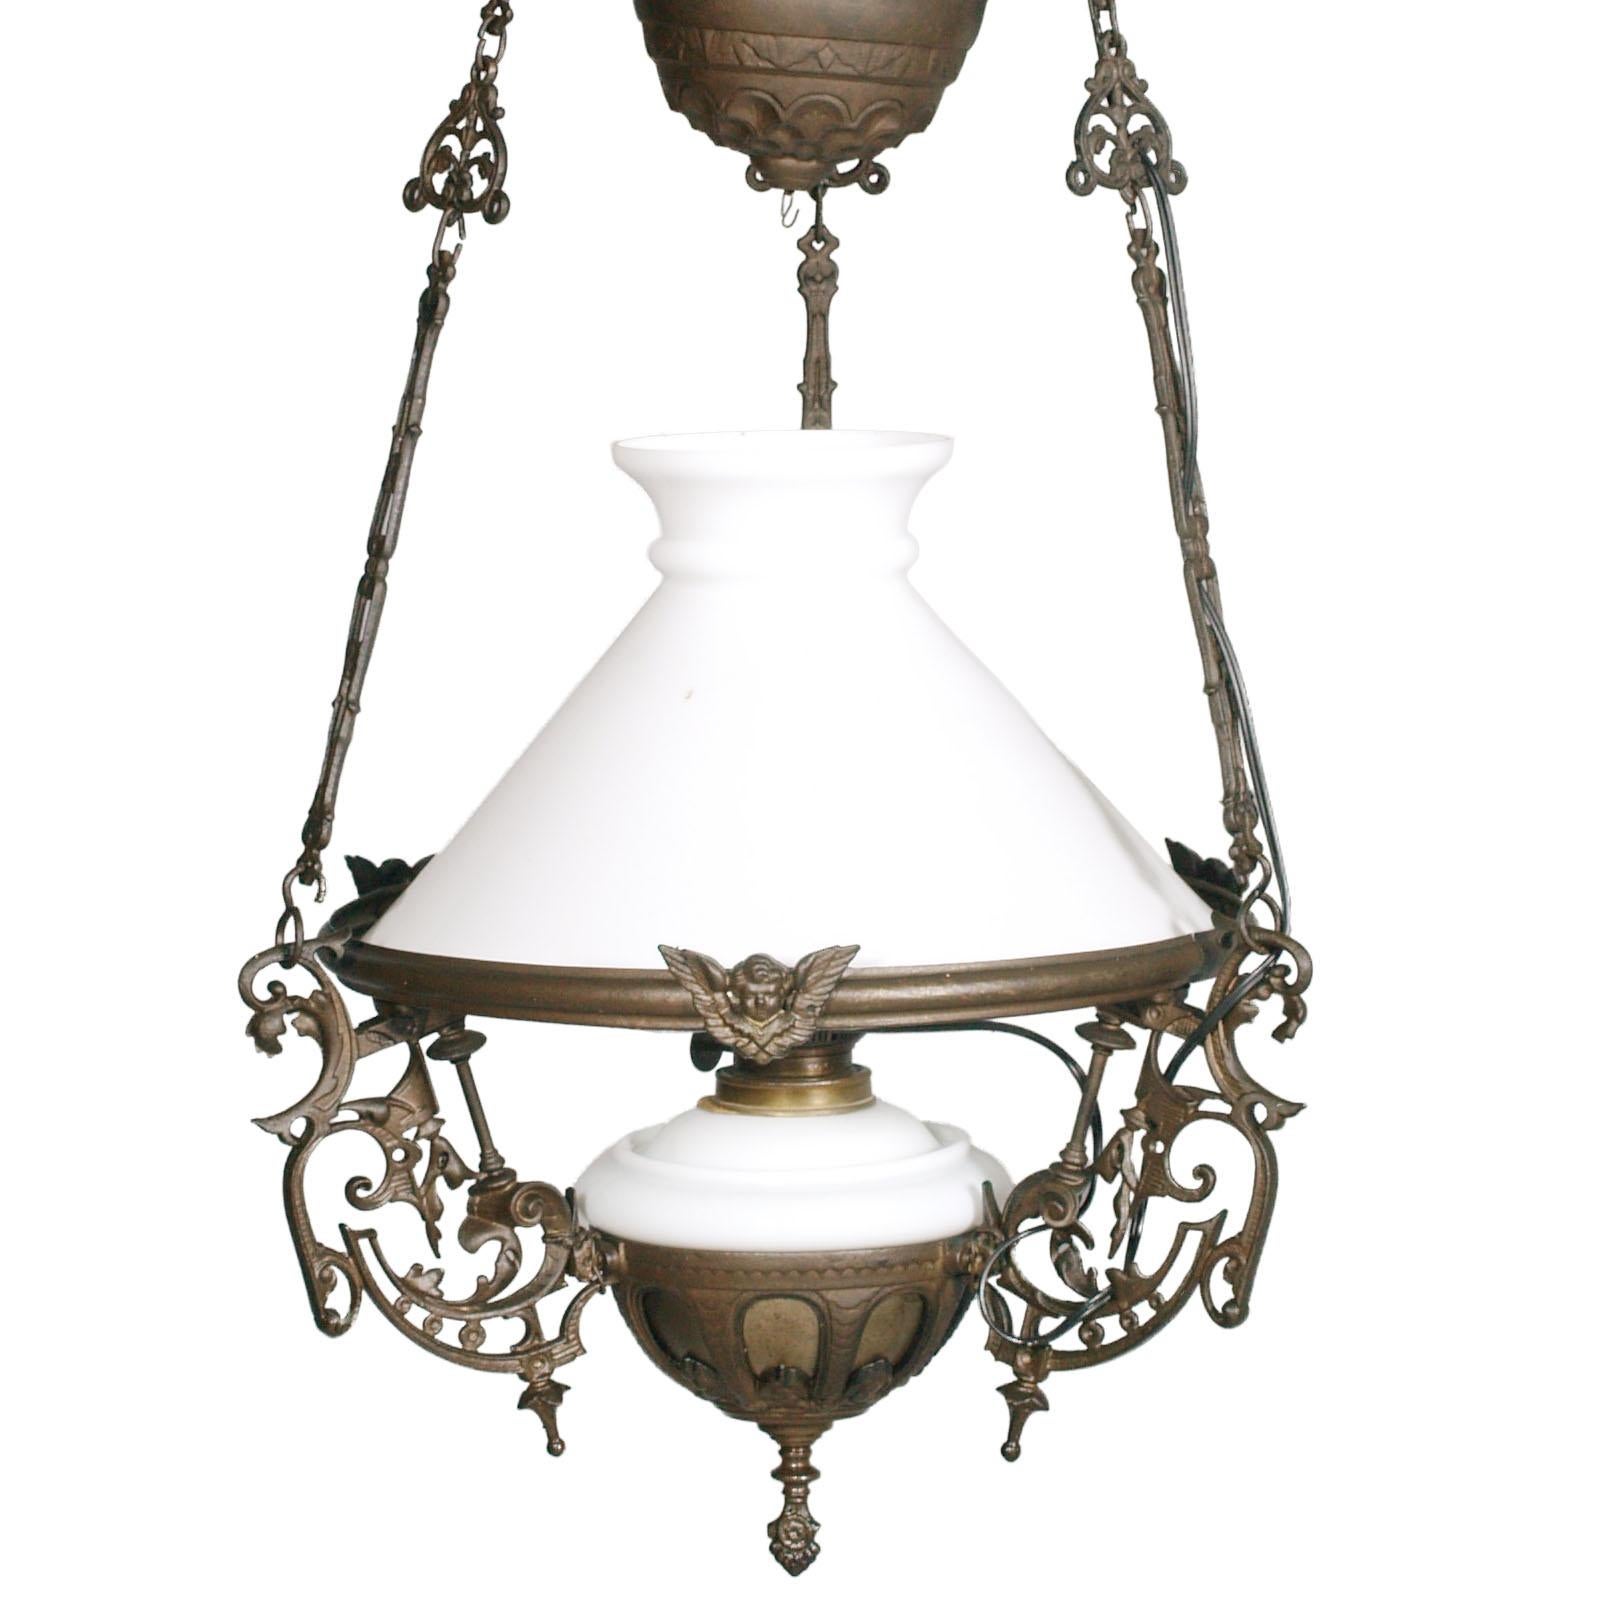 Antique Italian Art Nouveau chandelier, electrified and made from an oil lamp, in lattimo Murano glass and burnished bronze, height adjustable from cm 120 to cm 80. One light. Overhauled electrical system

Measures cm: height 90 max 135 diameter